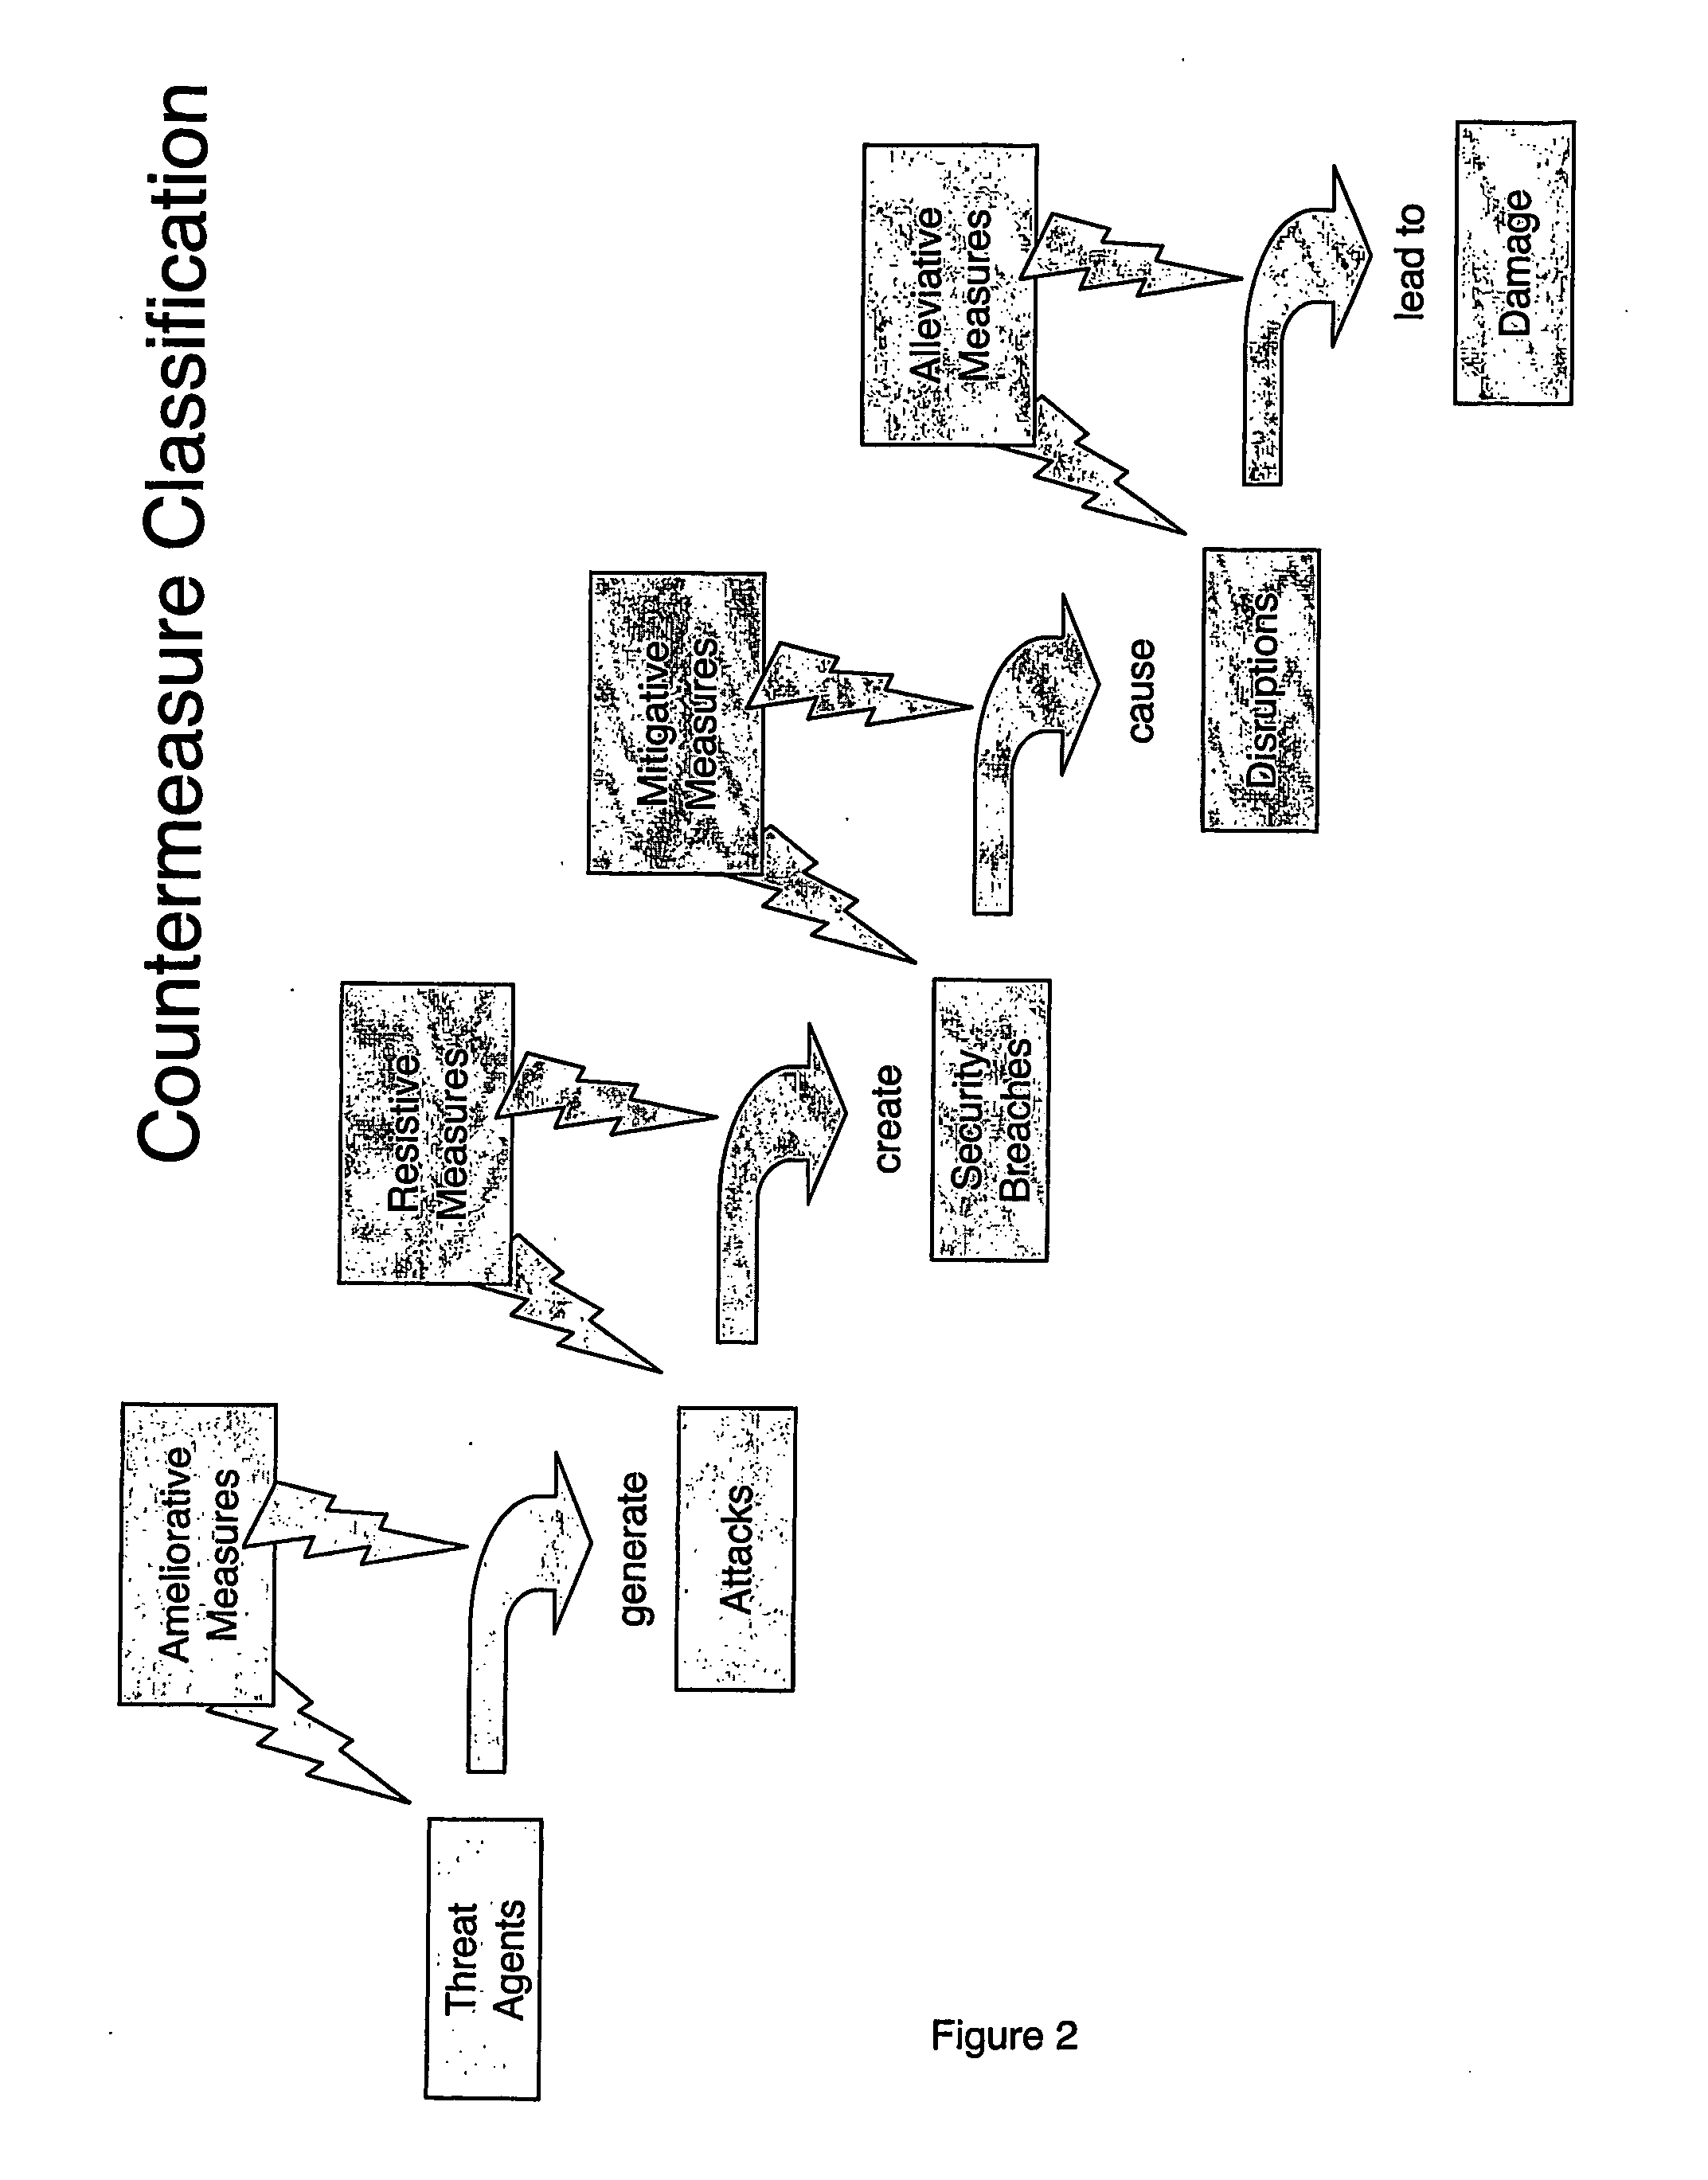 Method used in the control of a physical system affected by threats